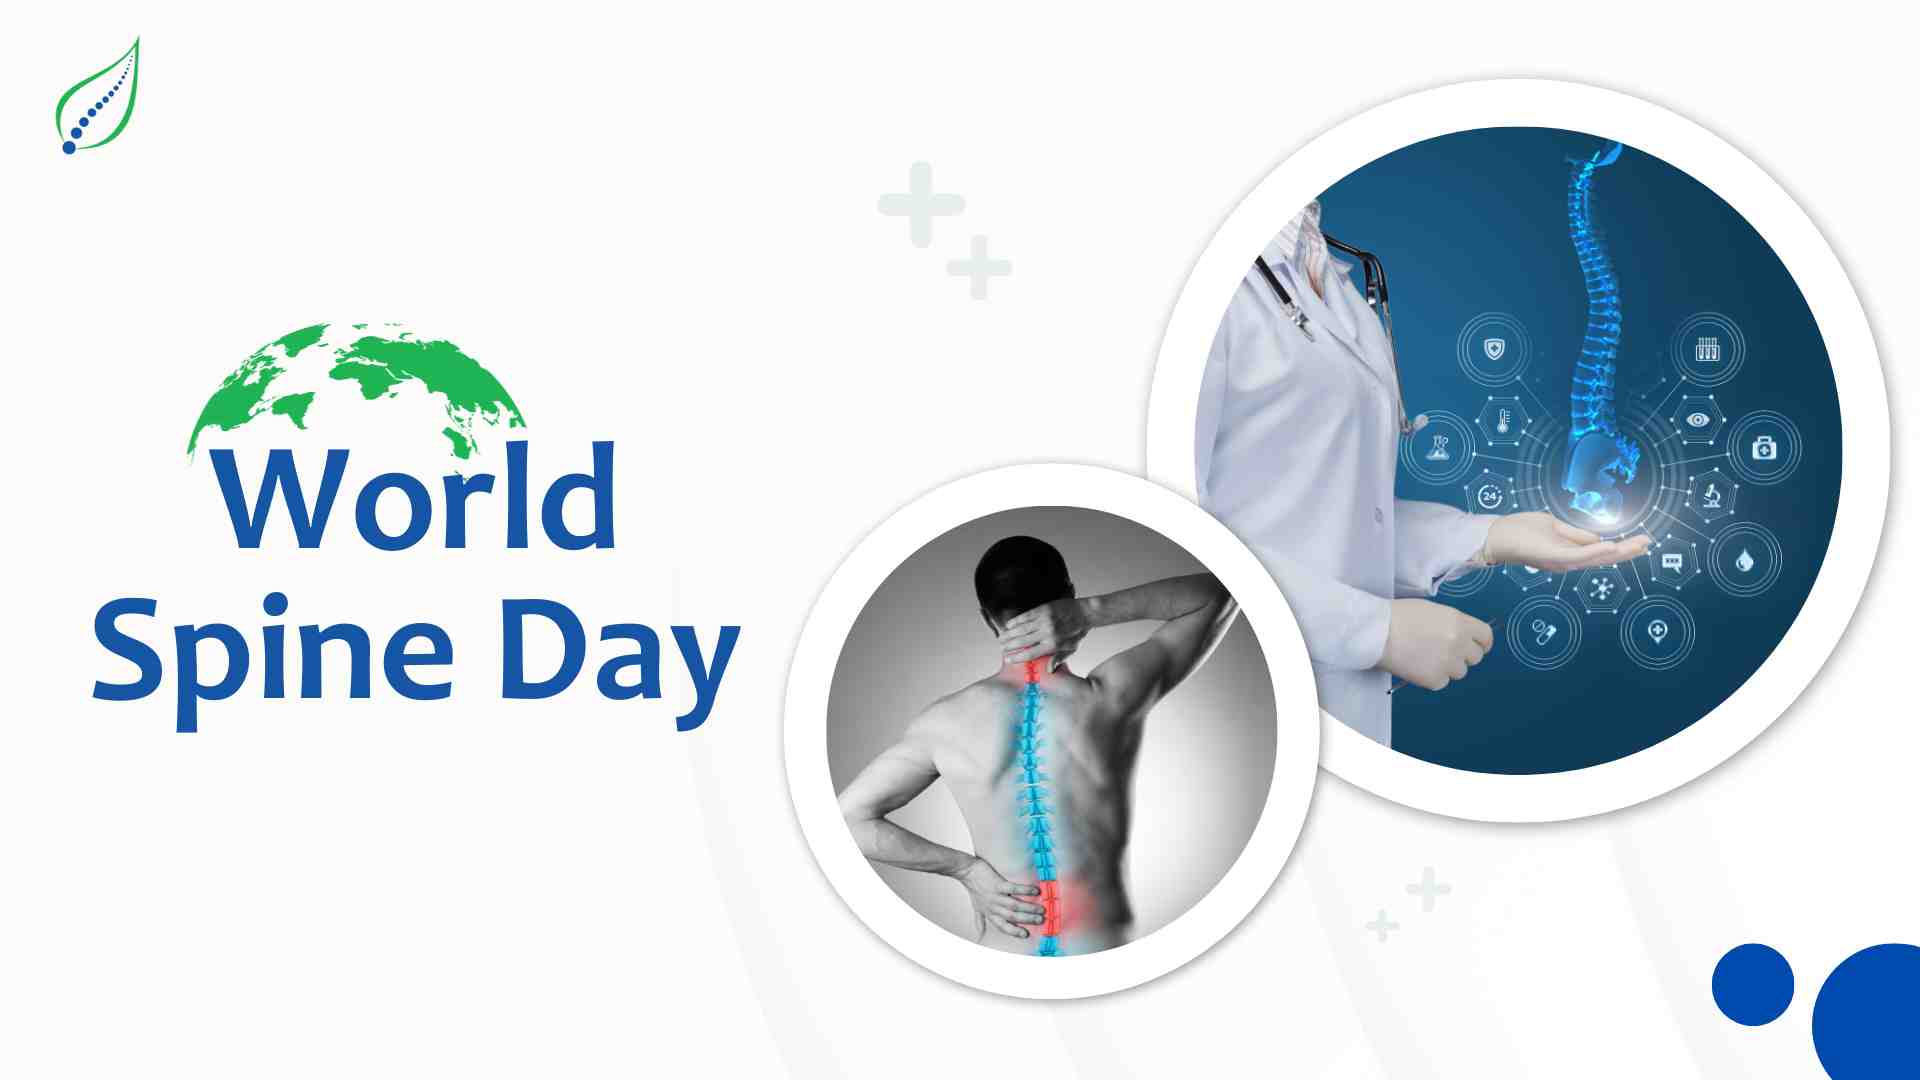 Move Your Spine - World Spine Day